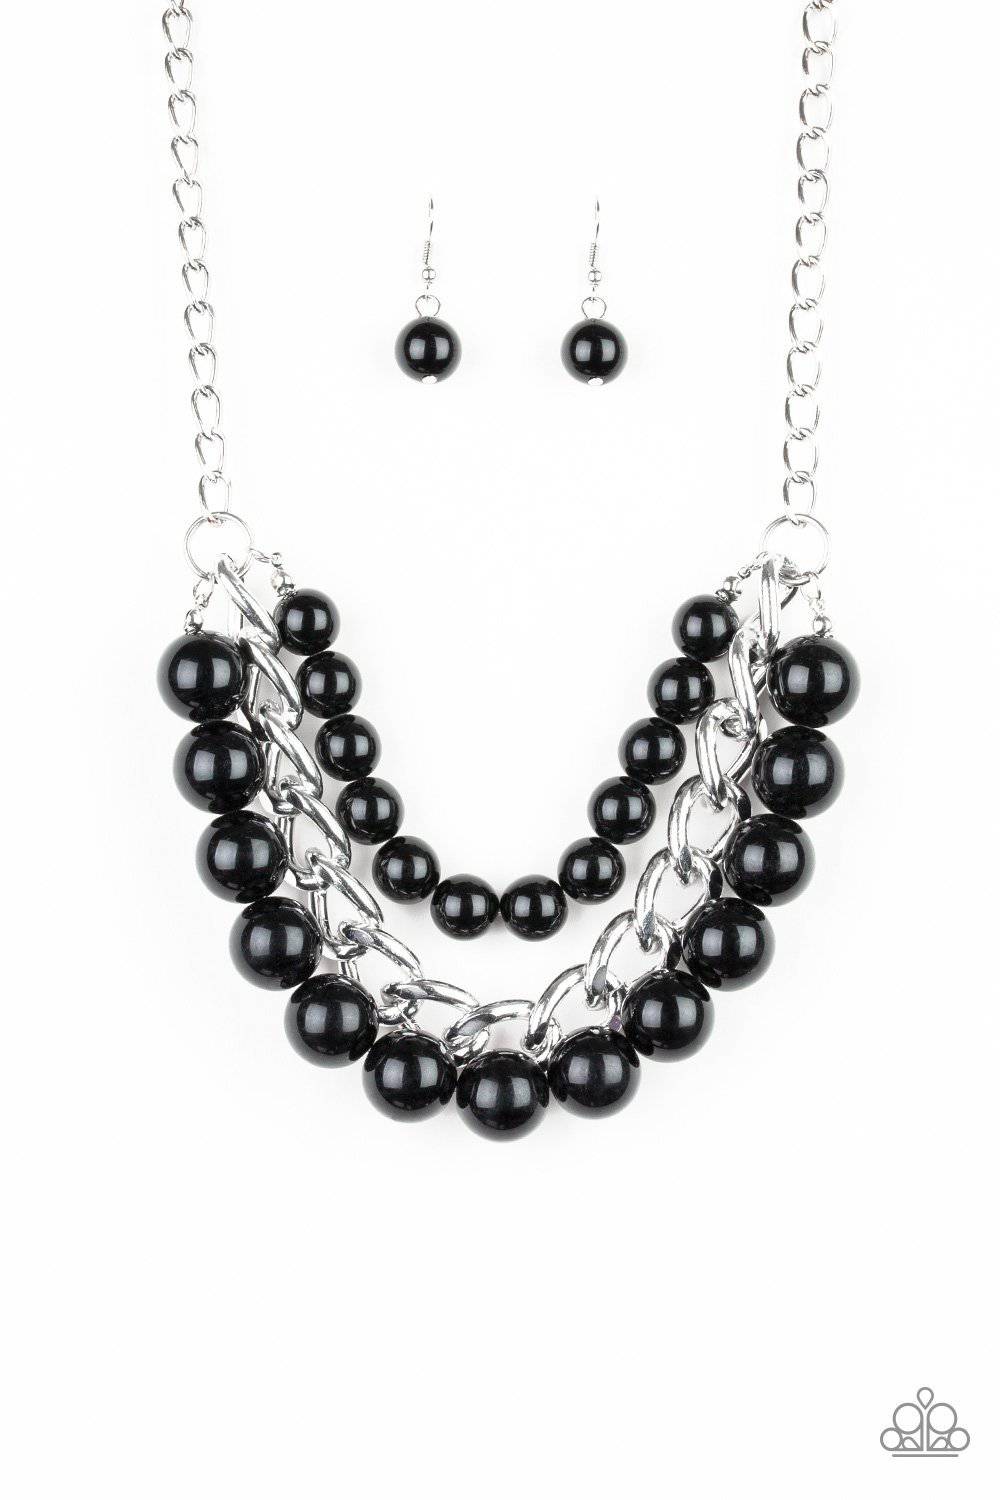 A34 - Empire State Empress Pearl Necklace by Paparazzi Accessories on Fancy5Fashion.com